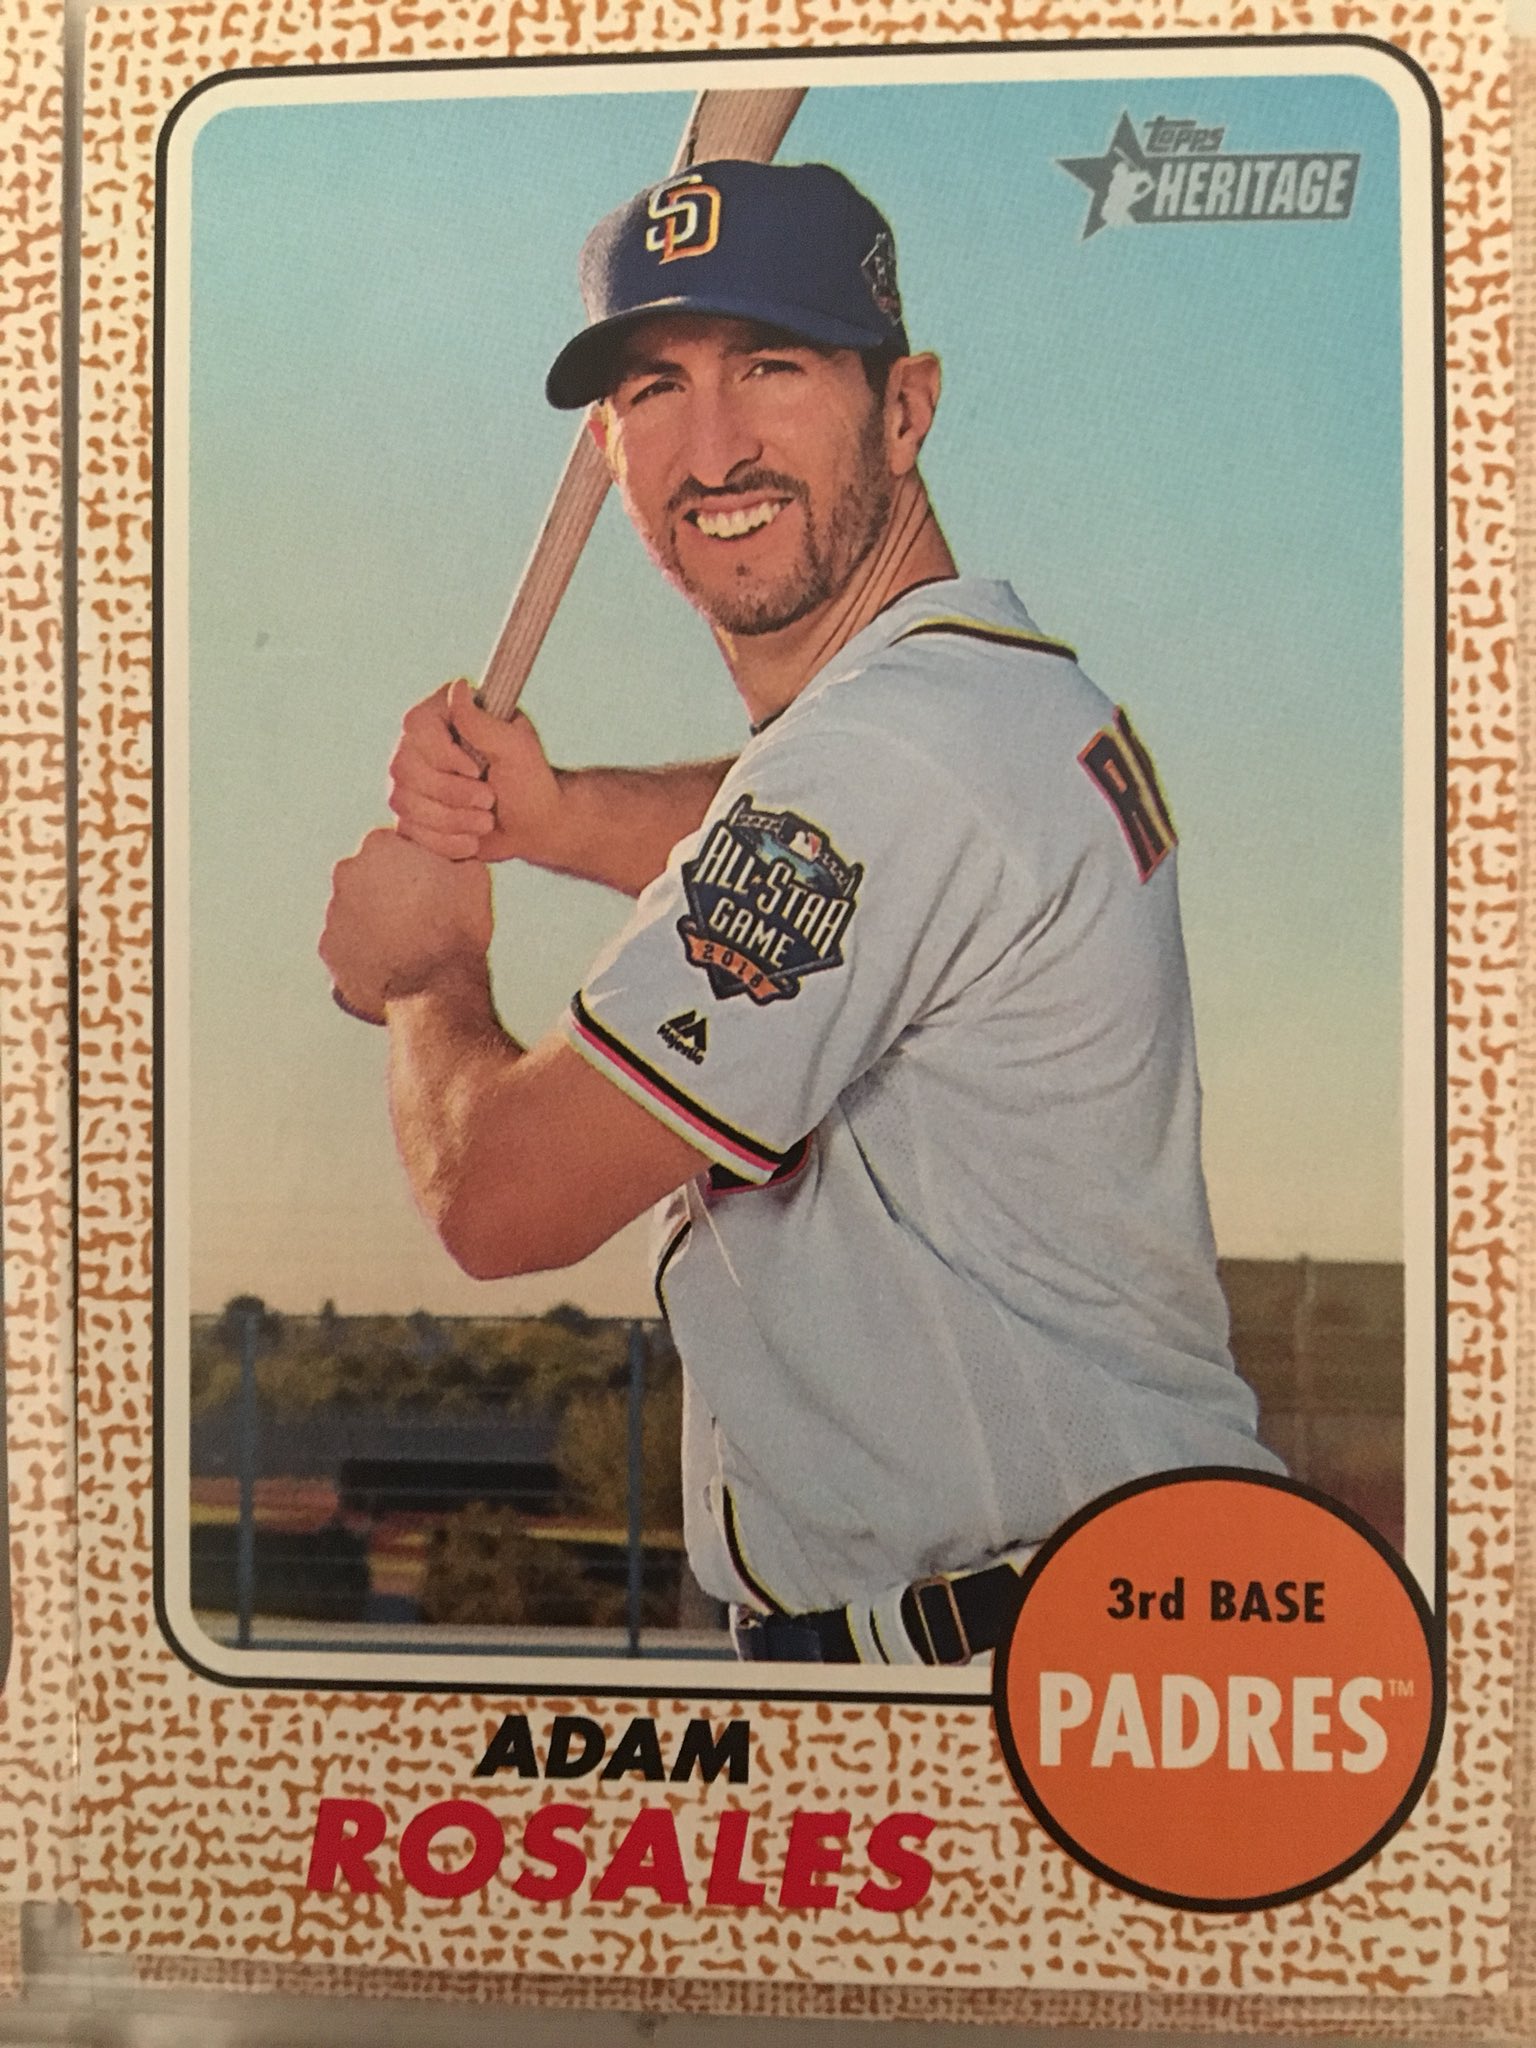 Happy birthday to former Friar and home run sprint enthusiast Adam Rosales. 